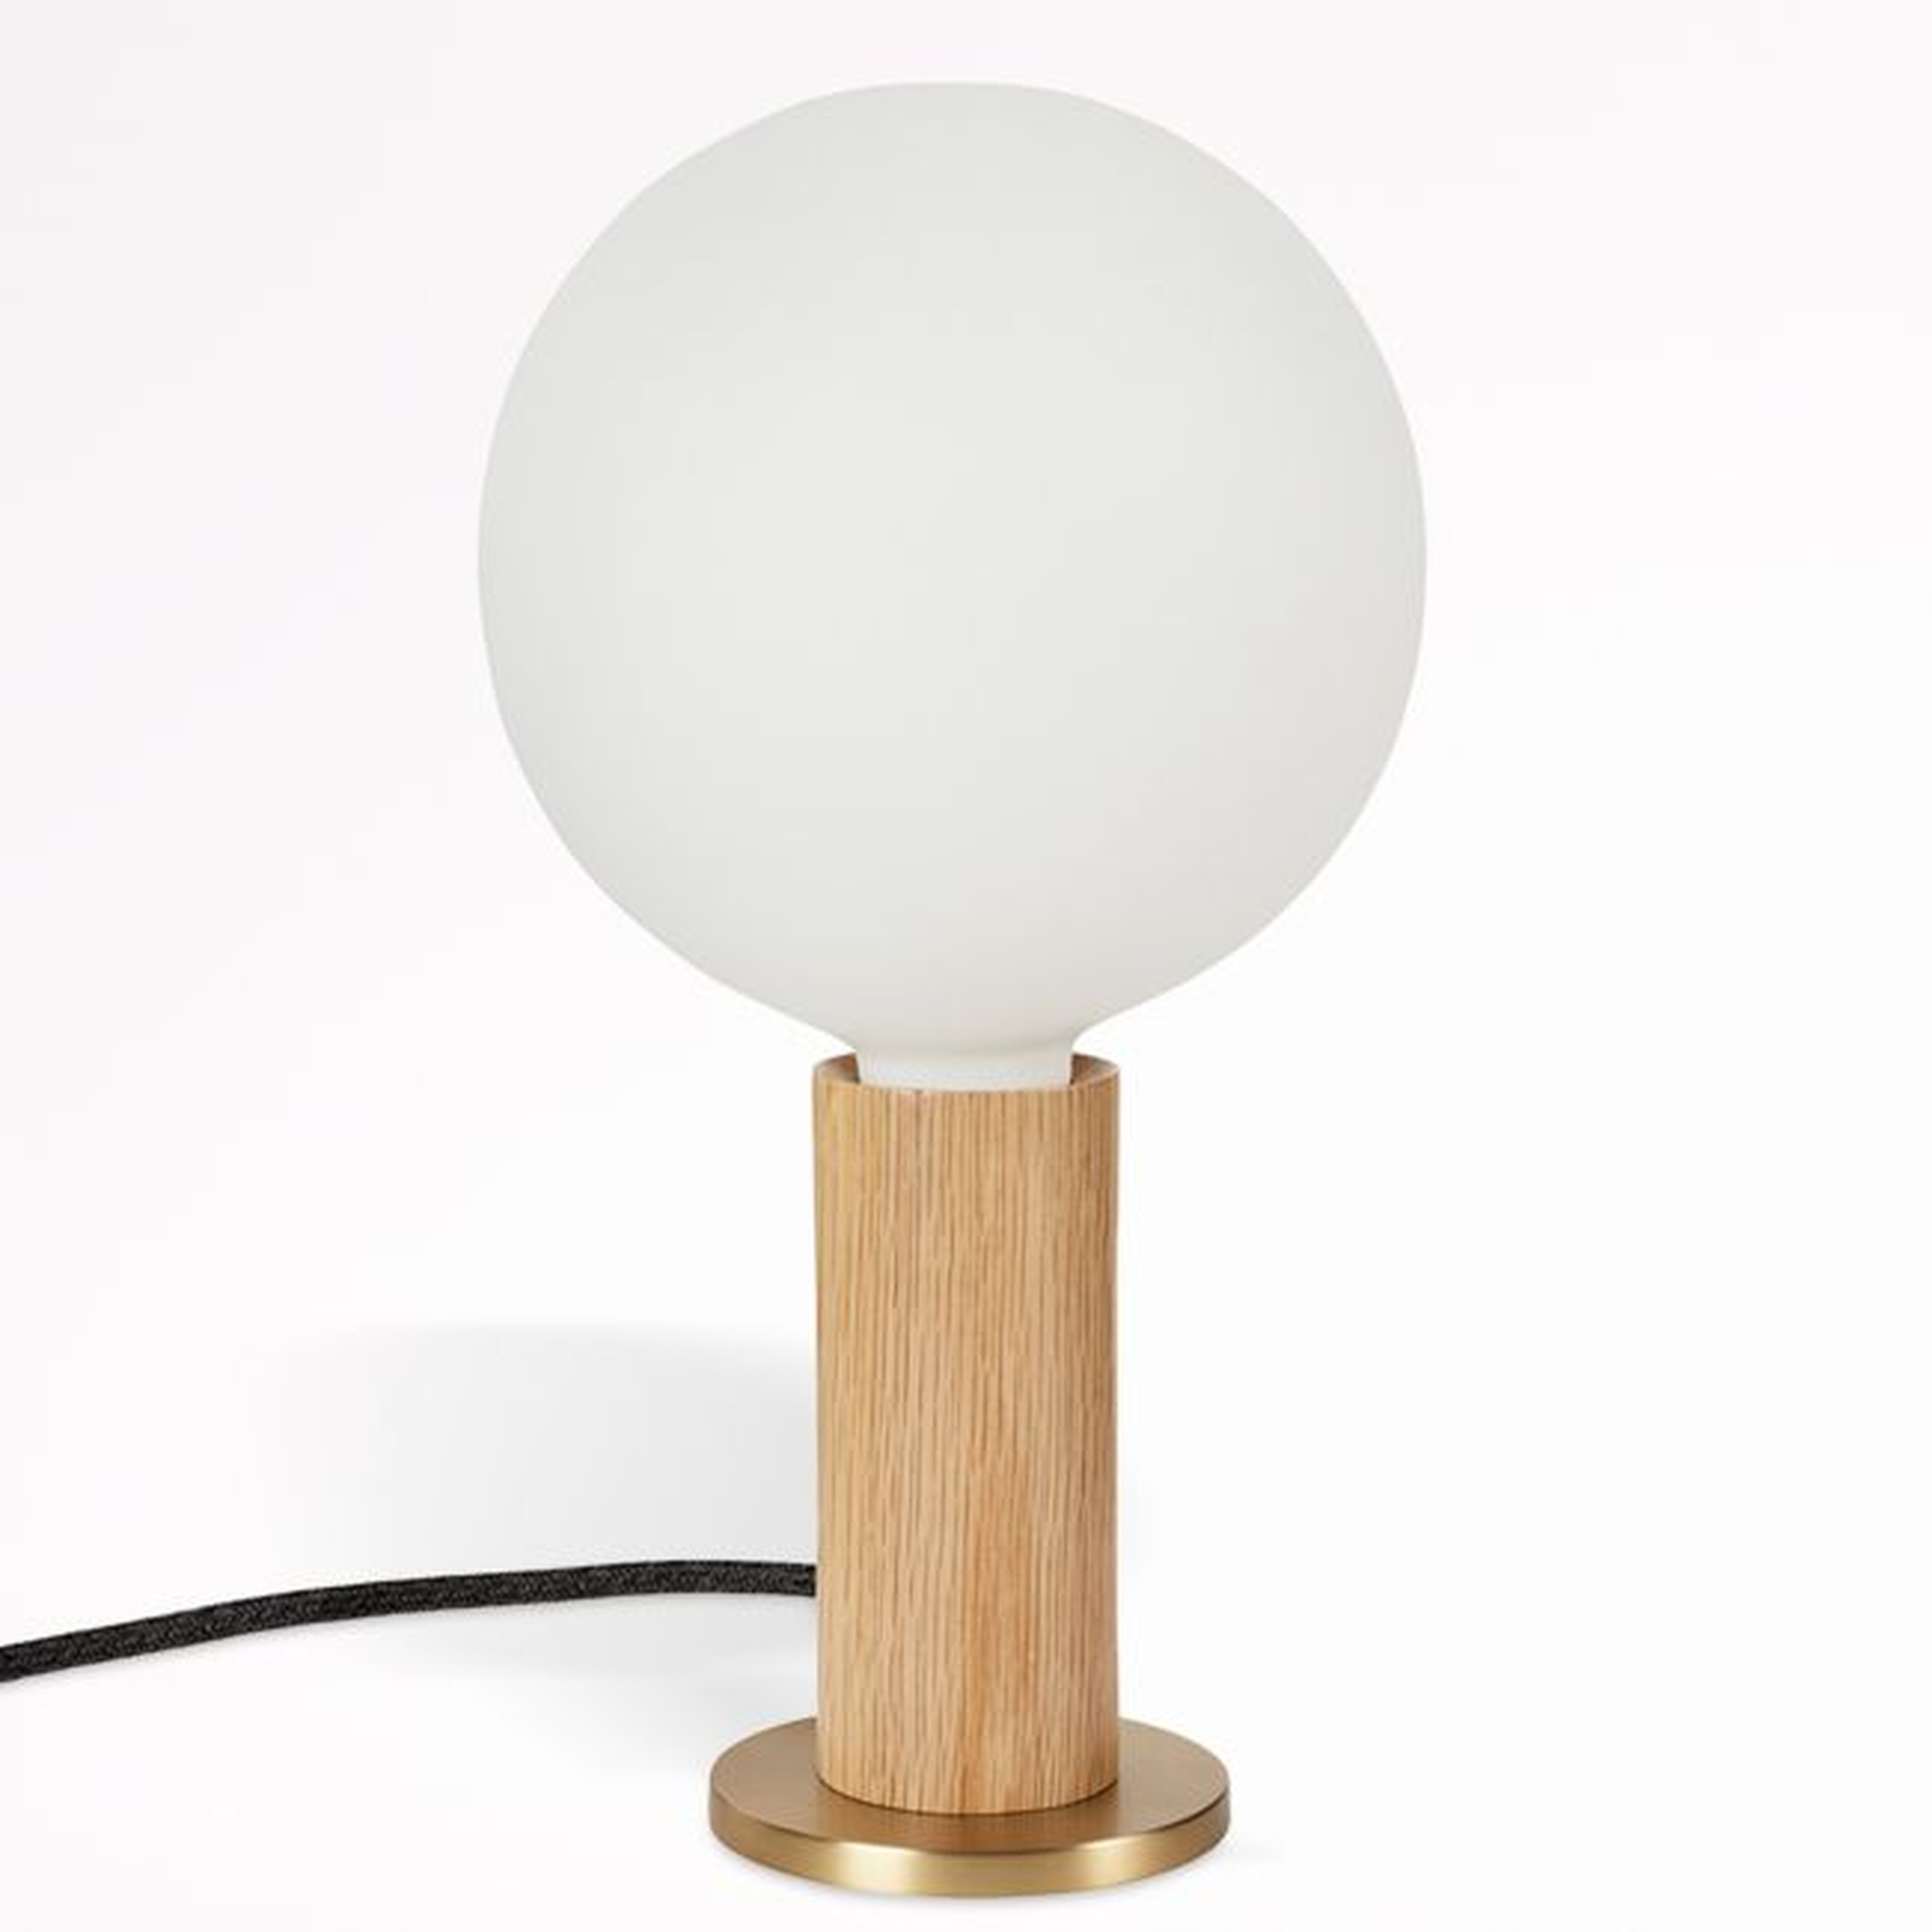 Tala Oak Table Lamp with Sphere IV Bulb - Crate and Barrel